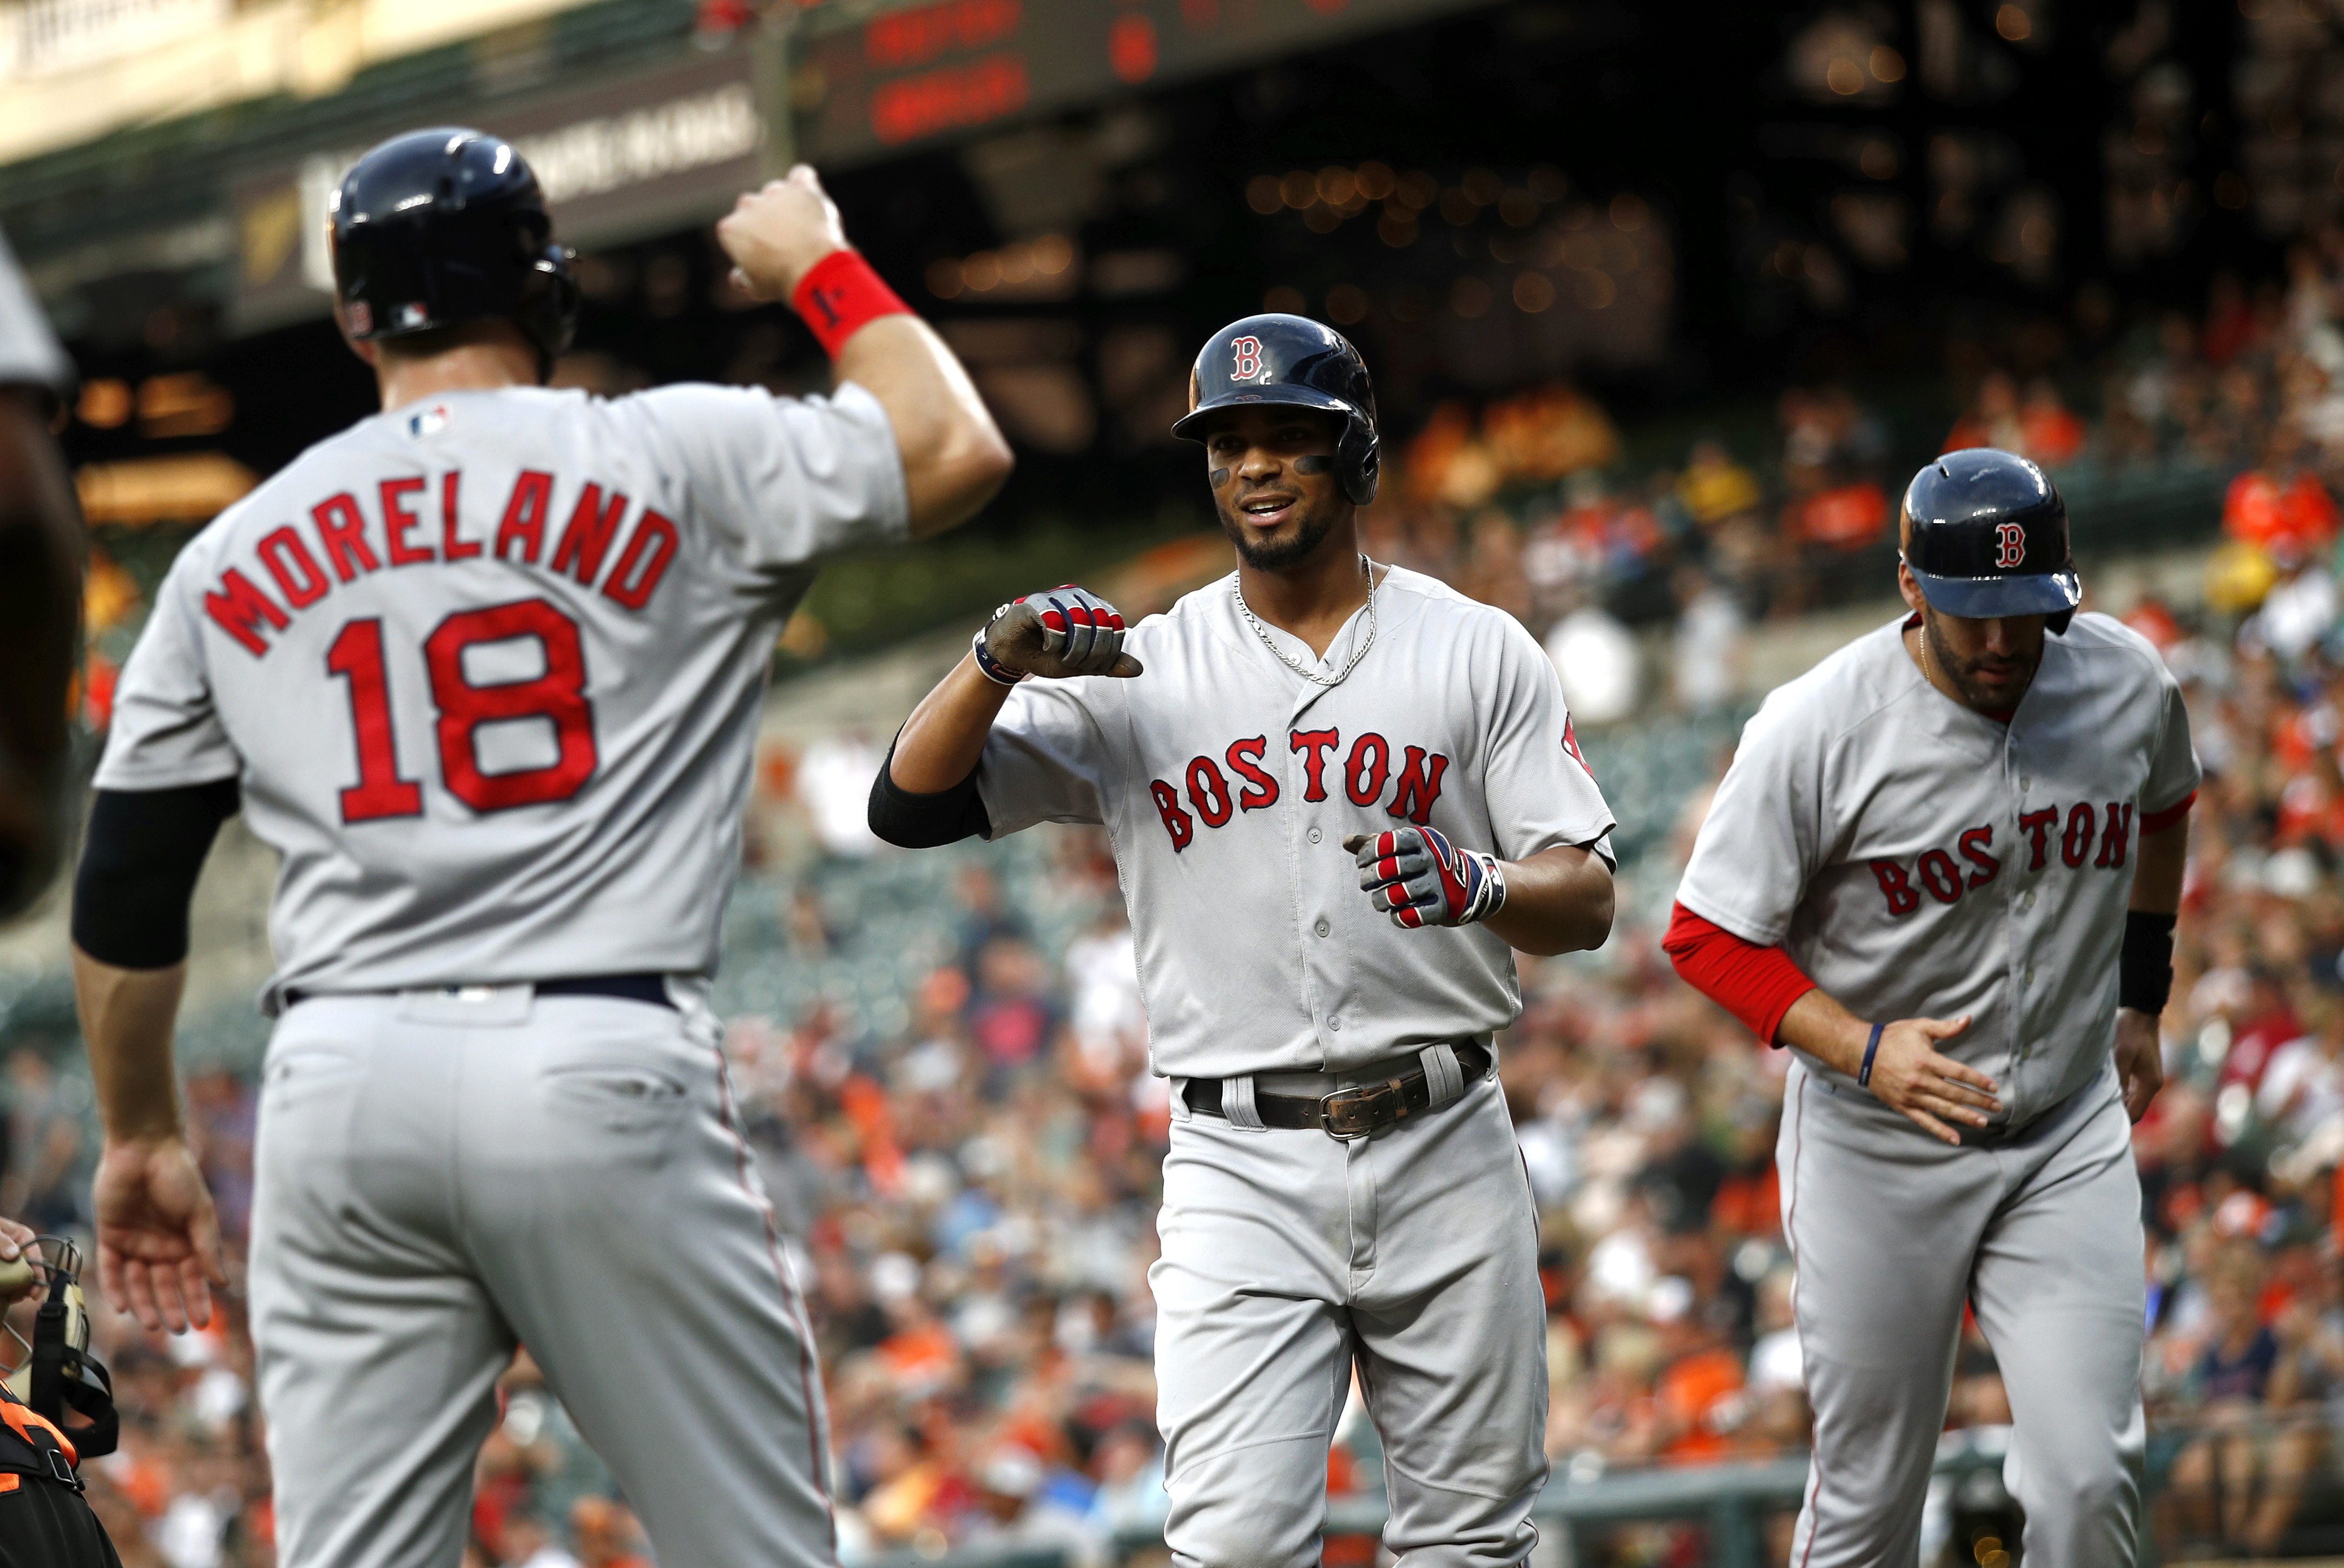 Red Sox hit 3 HRs, erase 5-run deficit and top Orioles 19-12